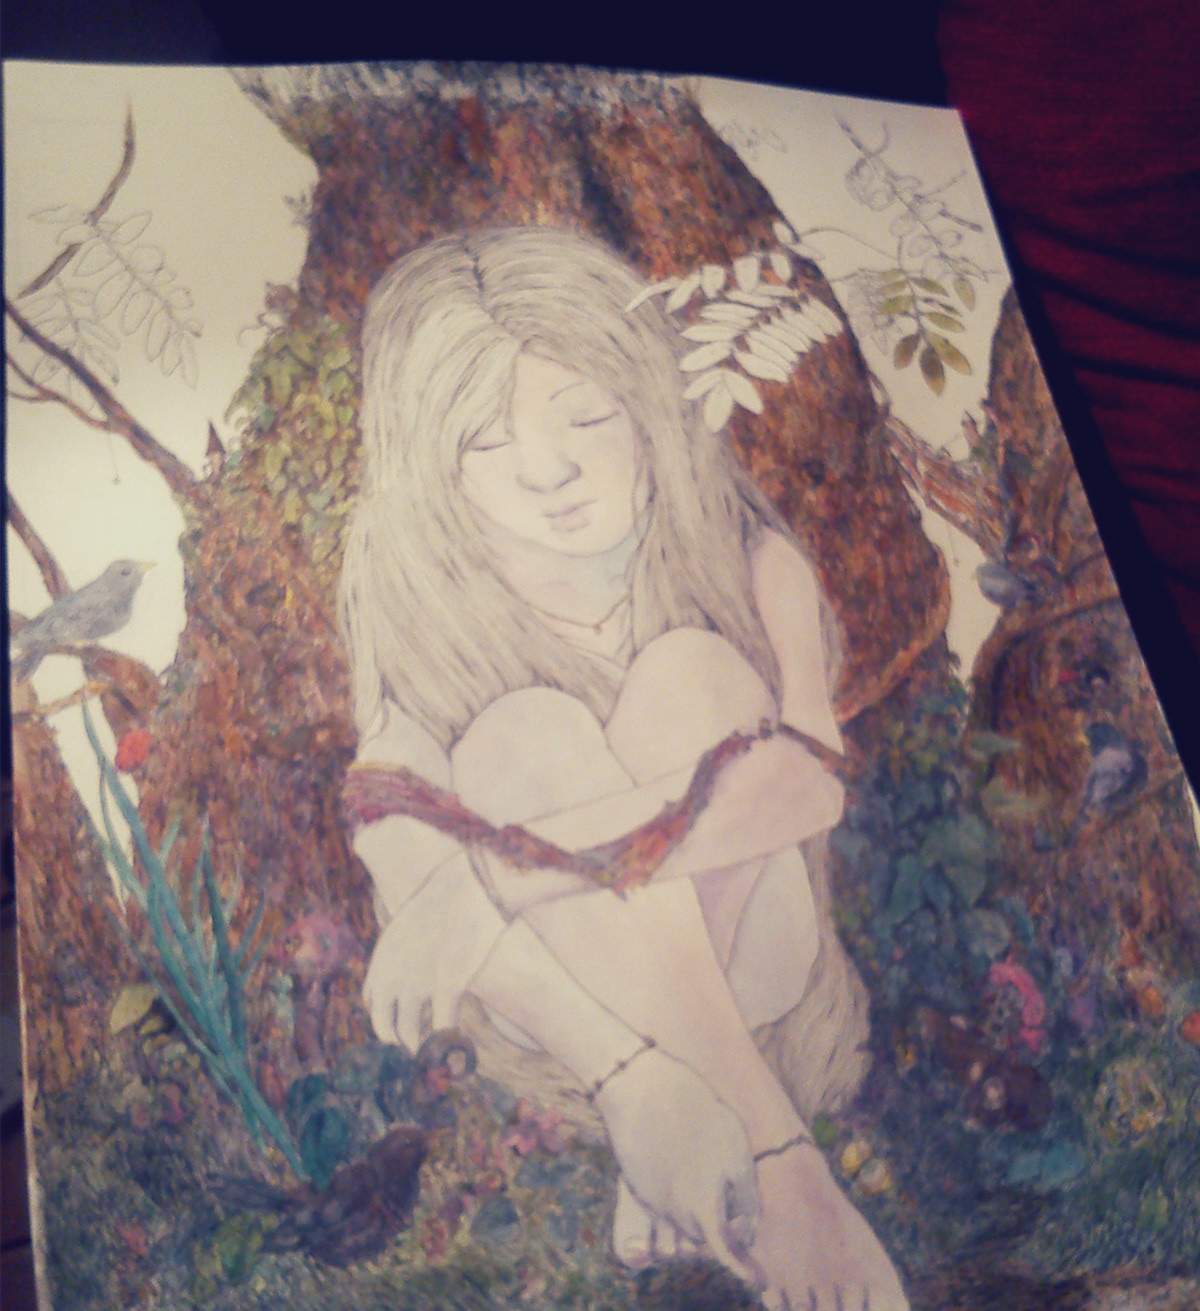 Nature woods girl Watercolours forest Fineliners dark ink pen